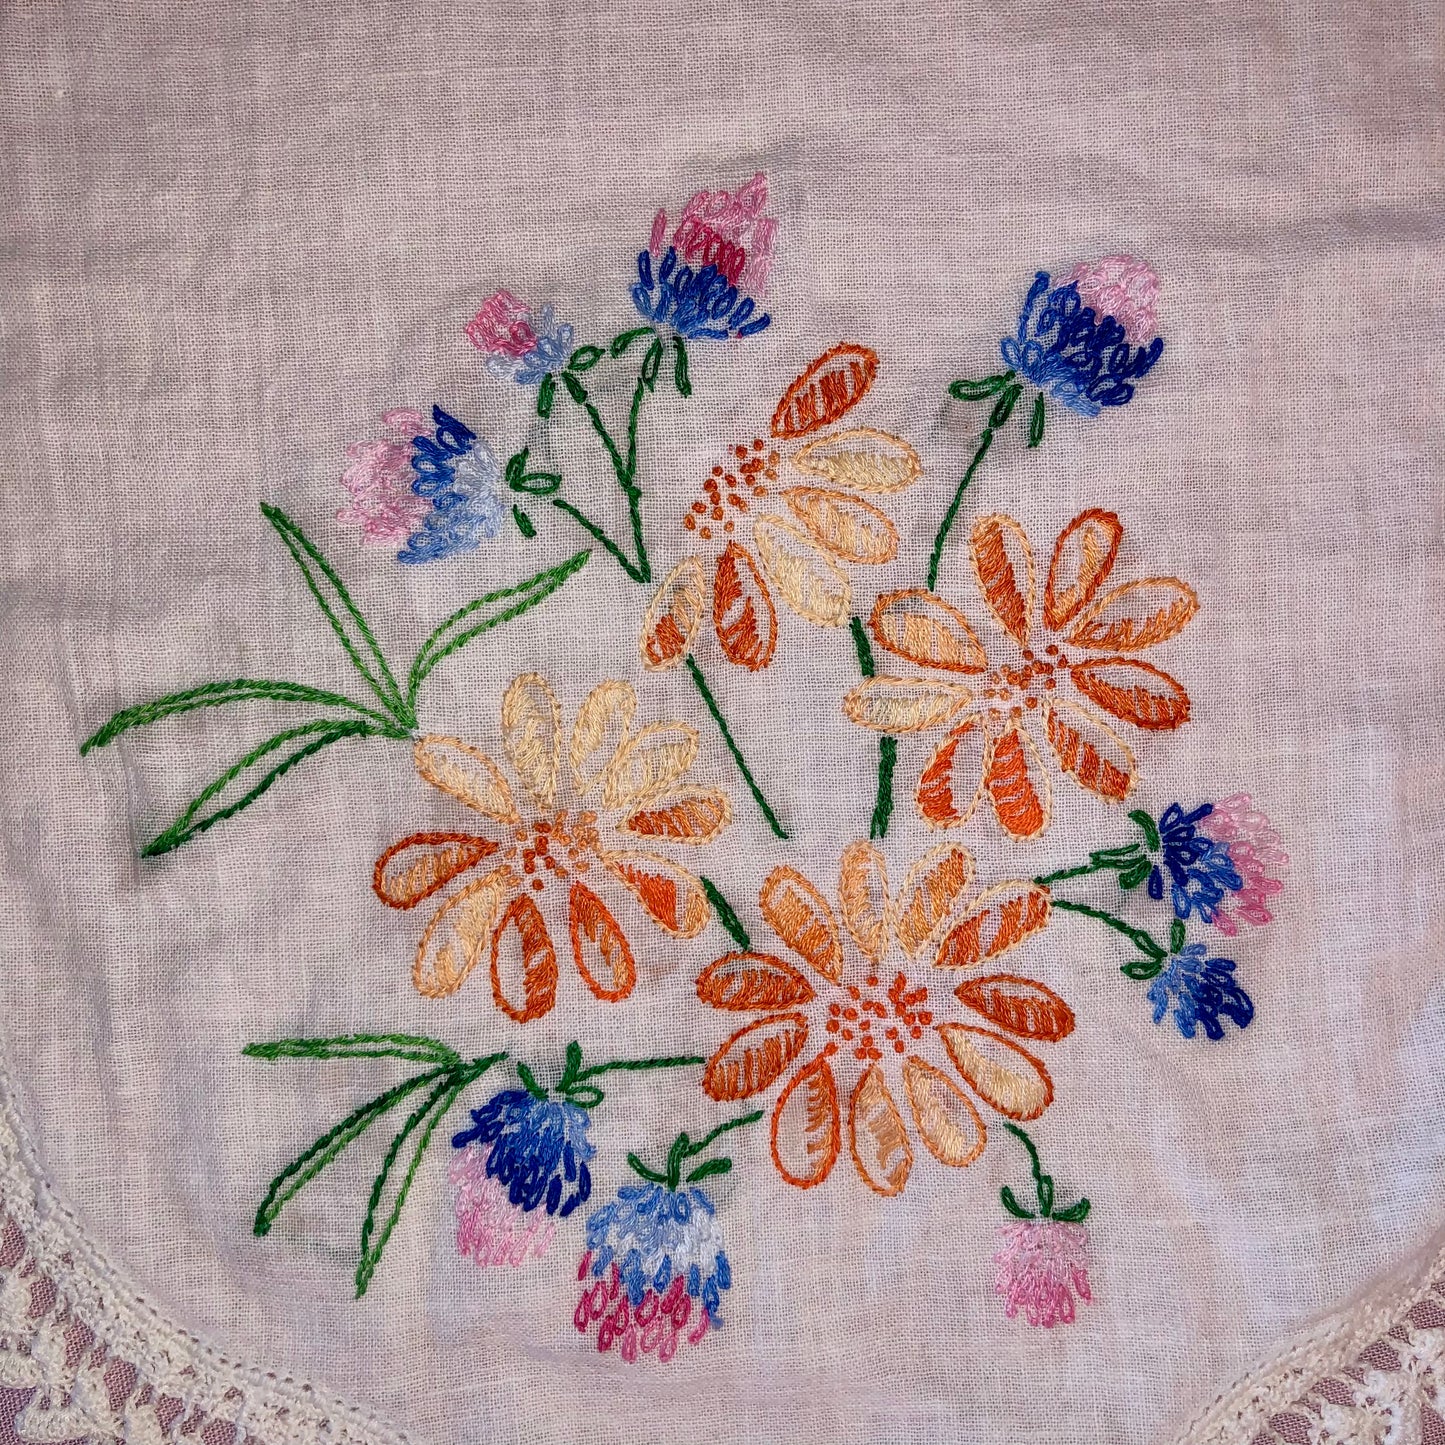 Up-Cycled 1940s-1950s Embroidered Banner